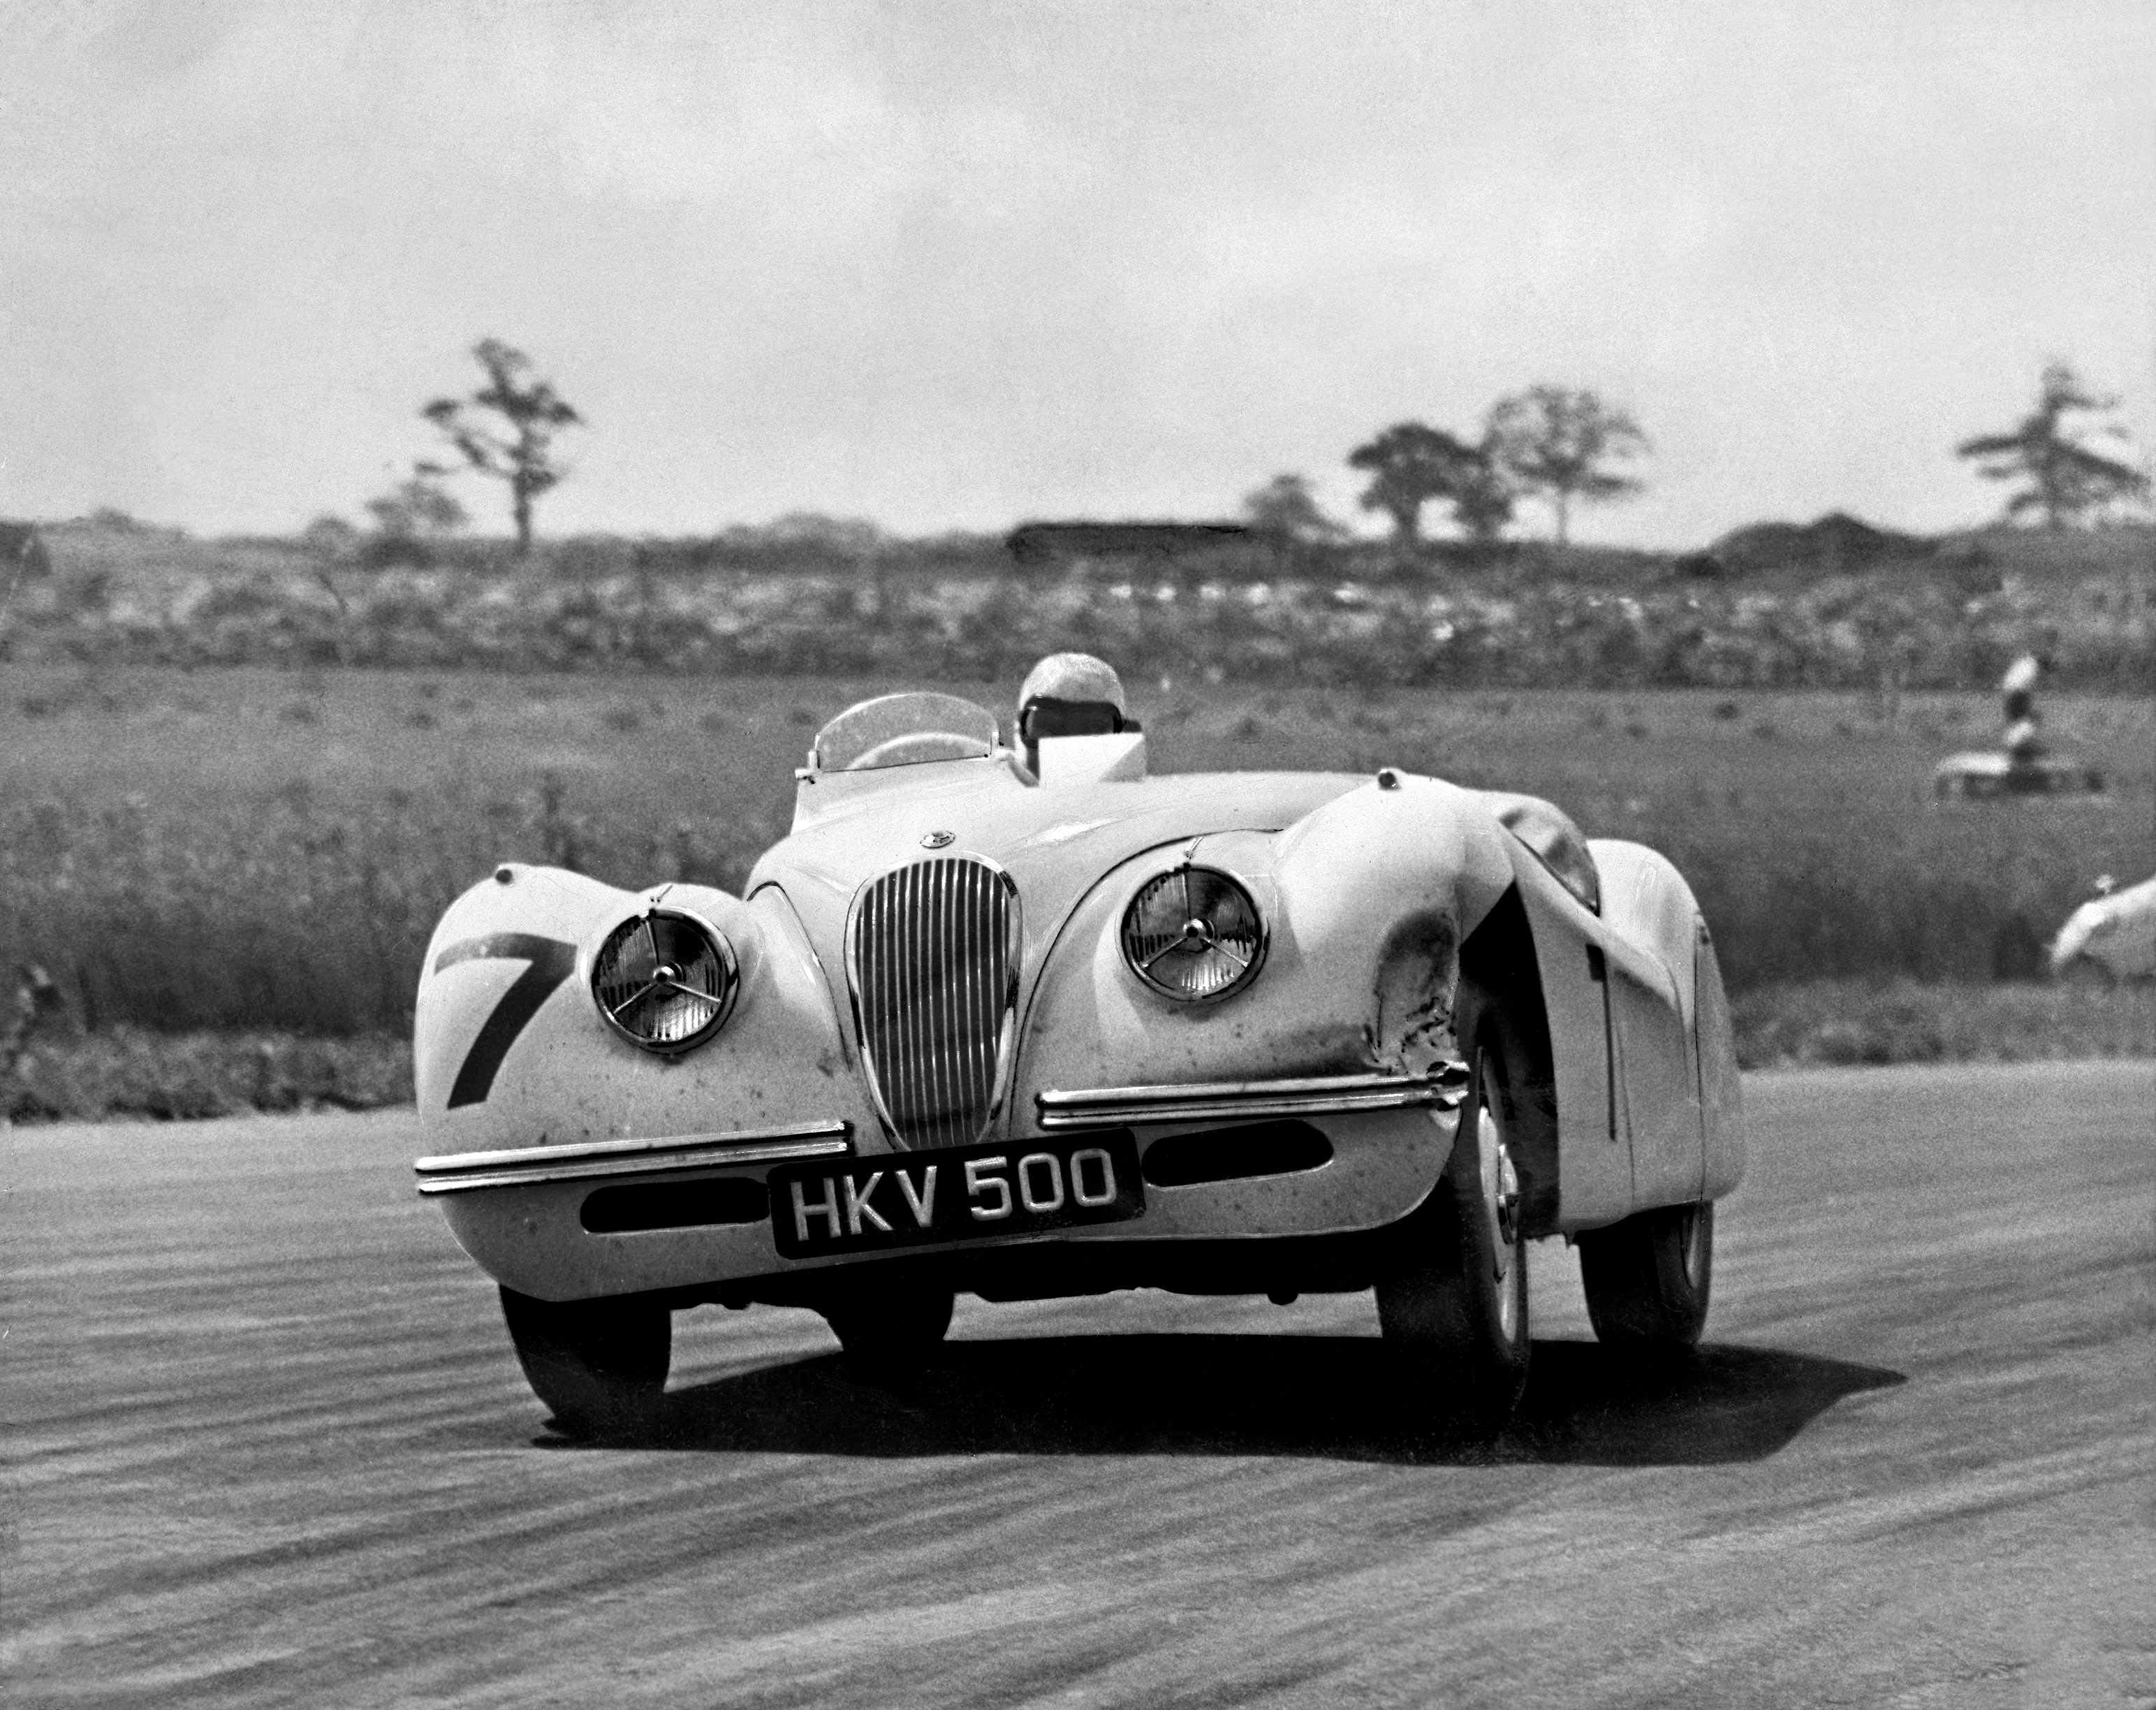  A Jaguar XK120 shown racing at Sebring in Florida in 1950. All images courtesy of Jaguar Land Rover North American Archives.